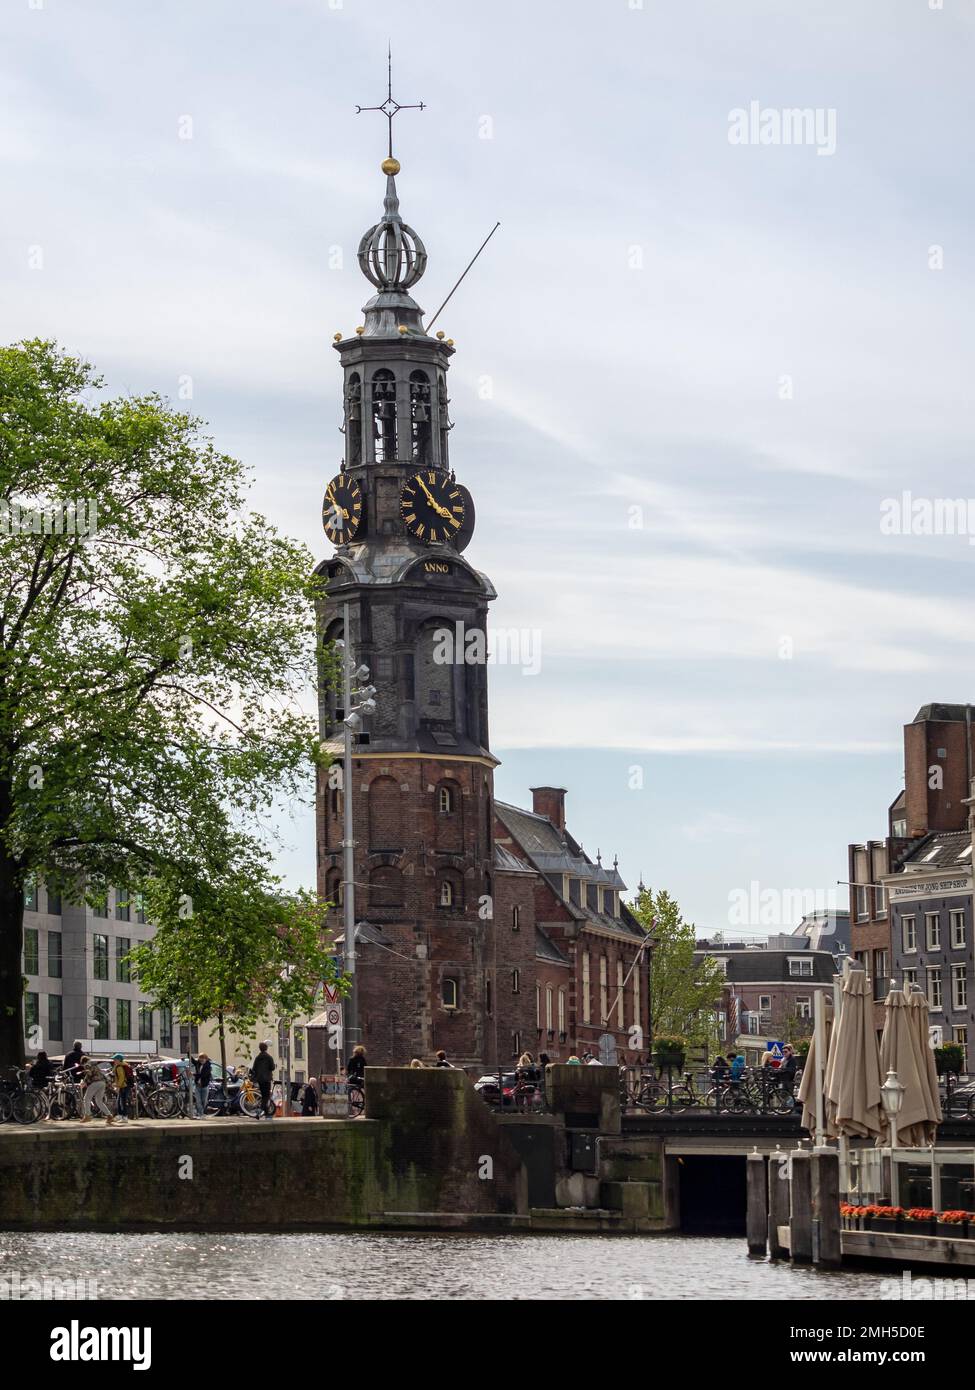 AMSTERDAM, NETHERLANDS - MAY MAY 01, 2018:  Exterior view of the Montelbaanstoren, a remnant of Amsterdams, medieval city walls Oude Schans waterway Stock Photo